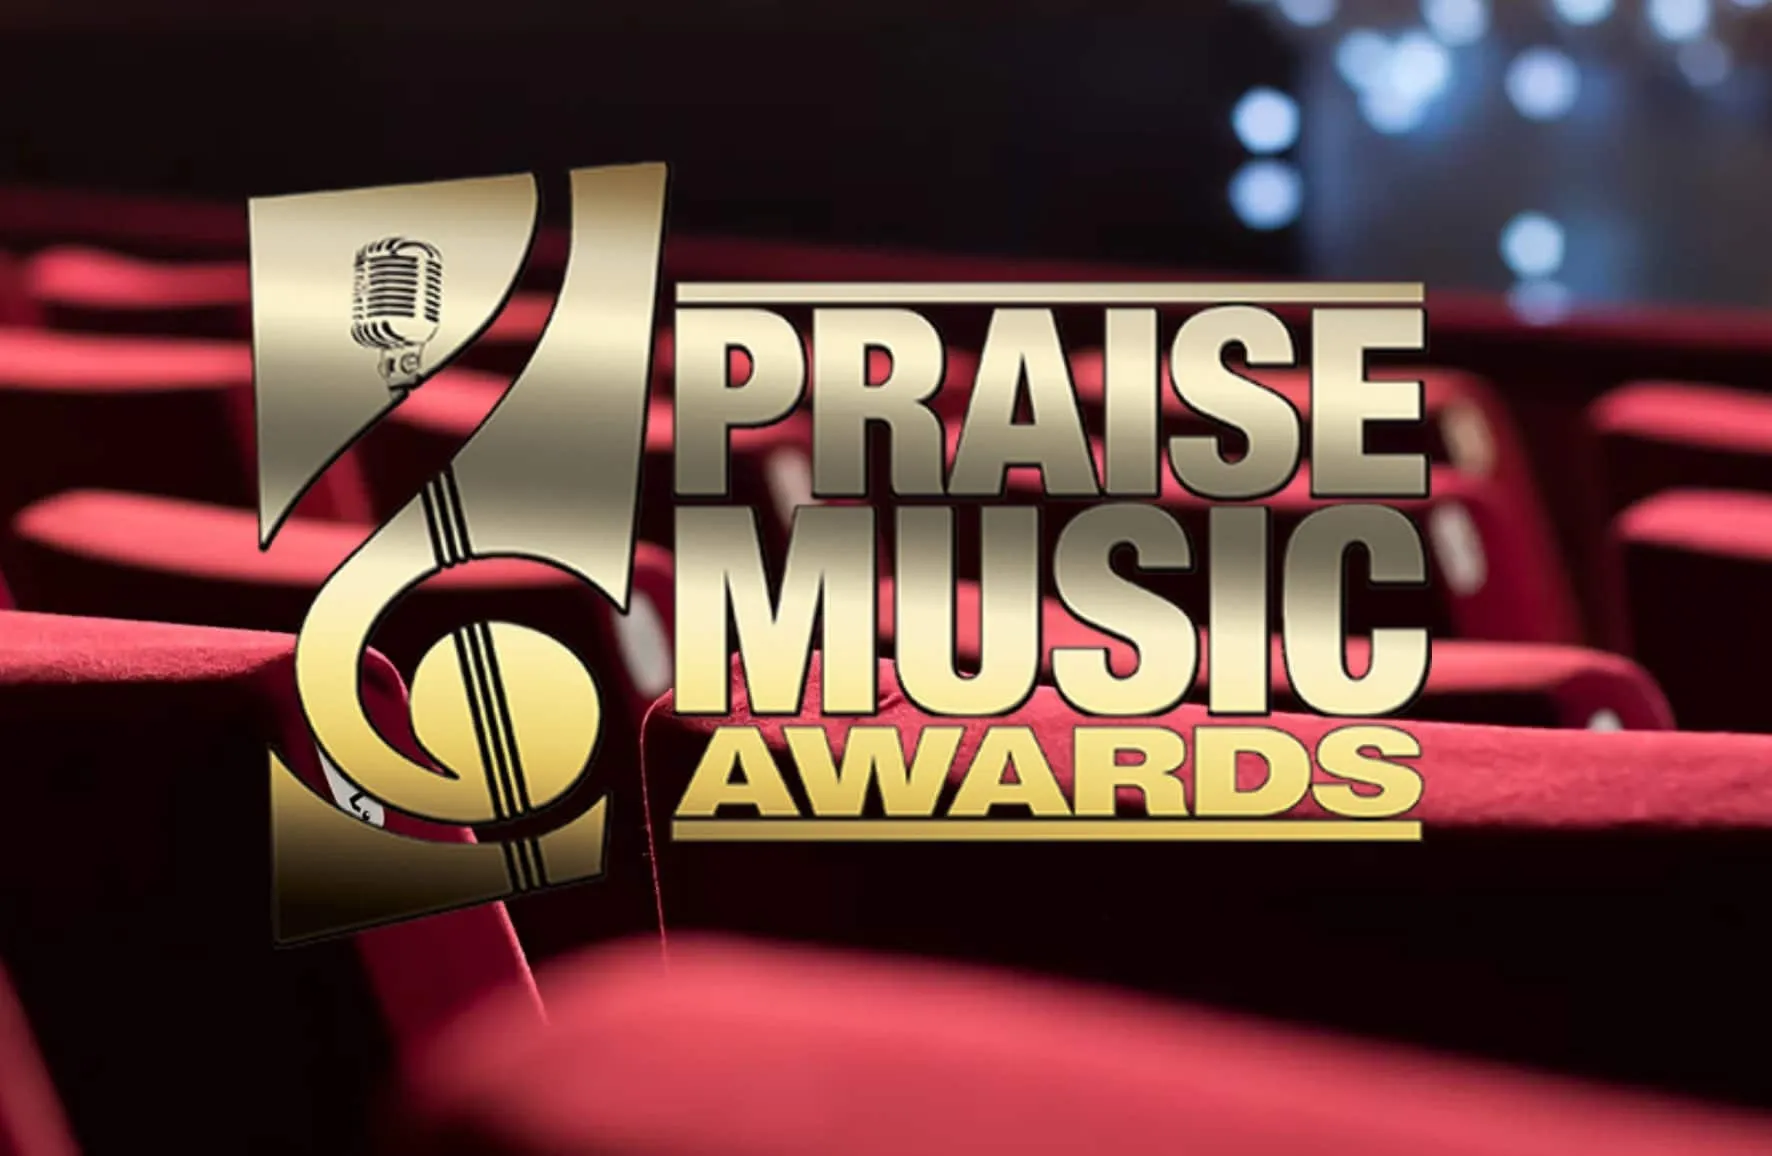 Praise Music Awards Colombia